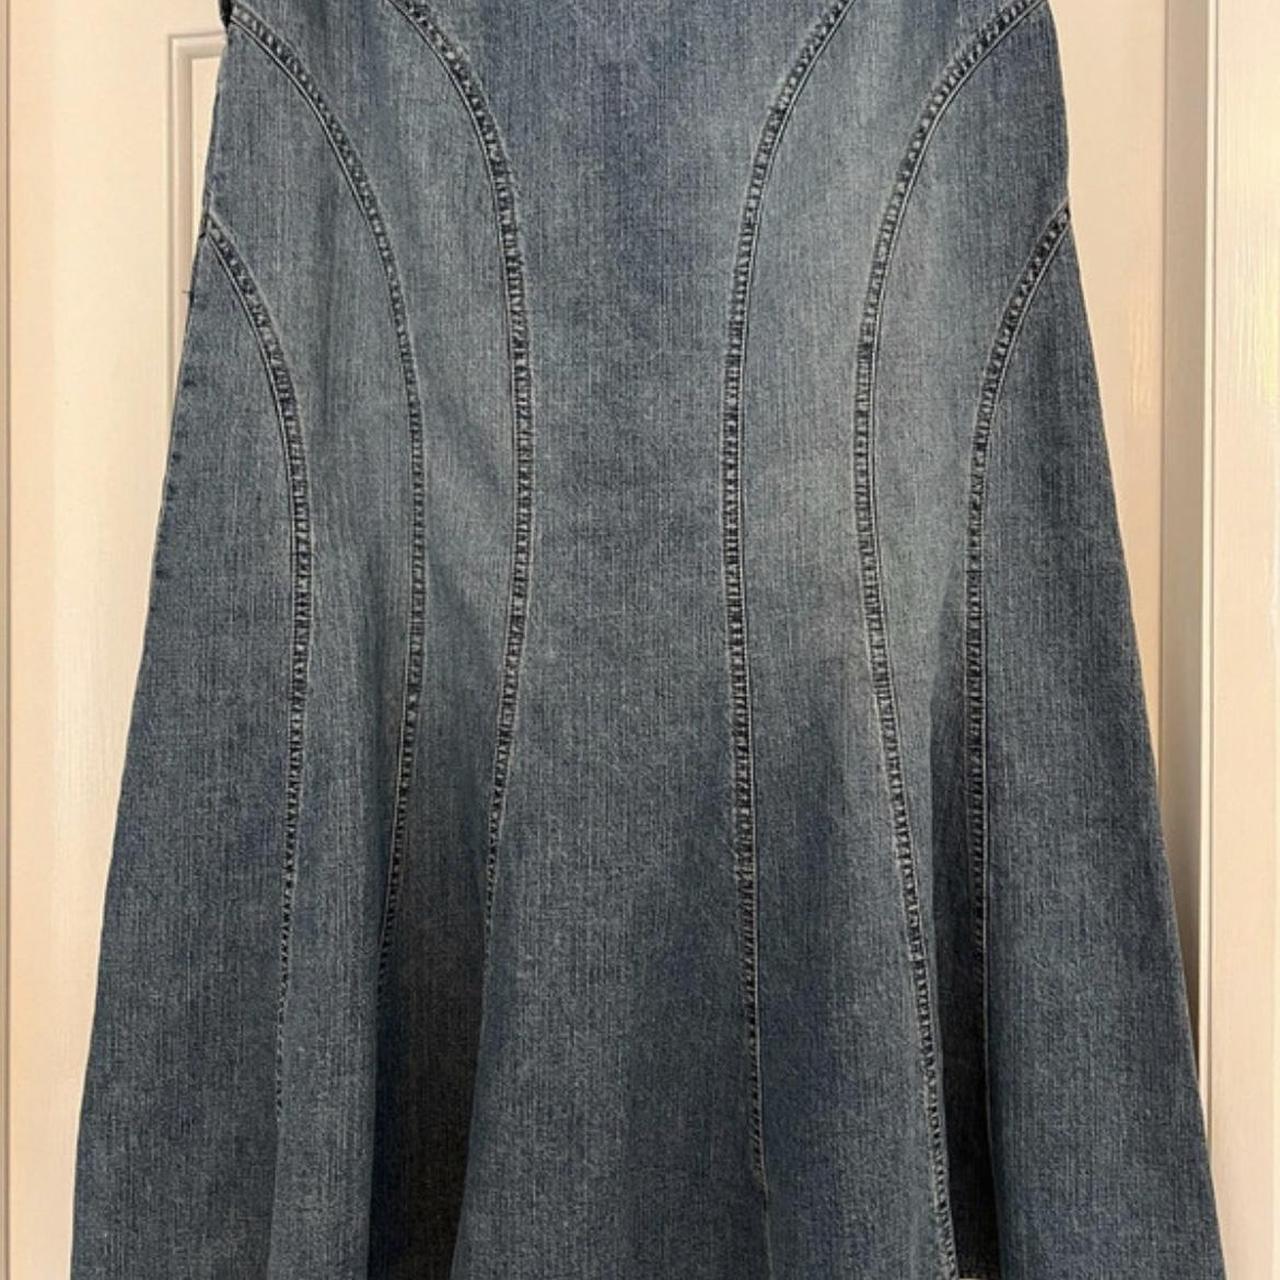 denim maxi skirt in great condition size 10 /... - Depop